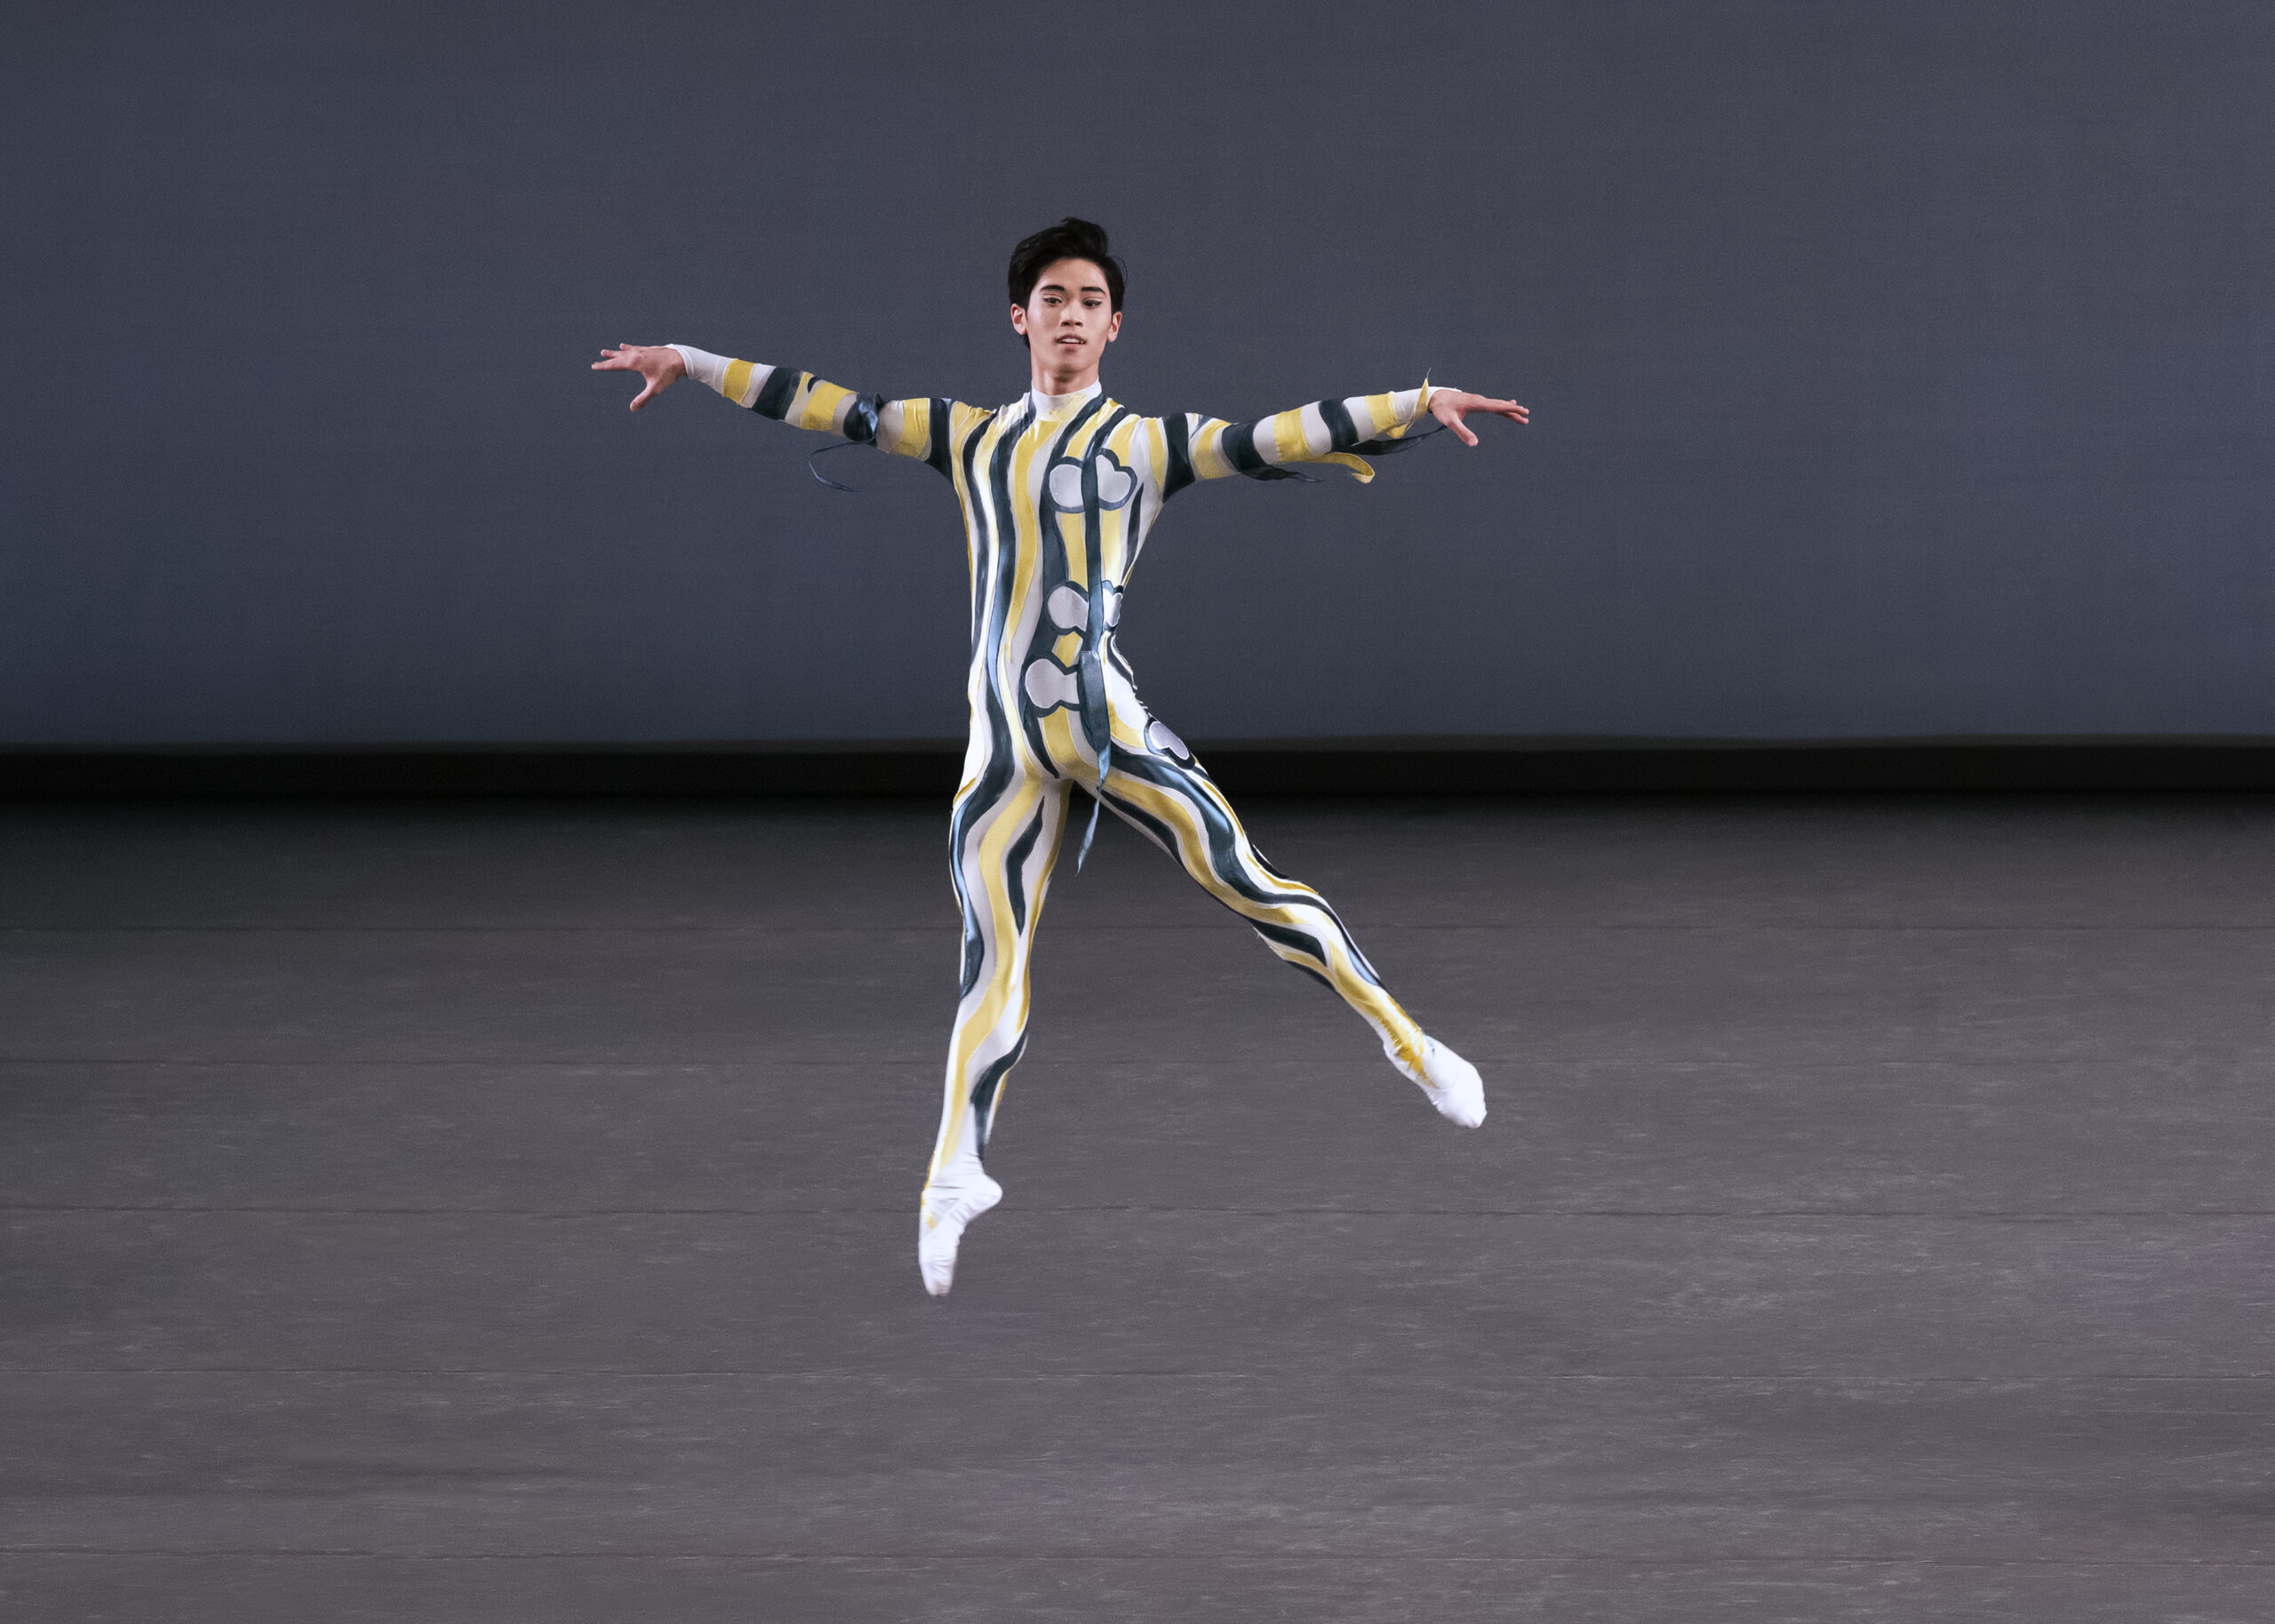 KJ Takahashi is caught mid-air in a temps levé, one leg extended to a 45 degree arabesque, both arms rising at shoulder height. He is alone onstage, wearing a unitard with squiggly patterns.